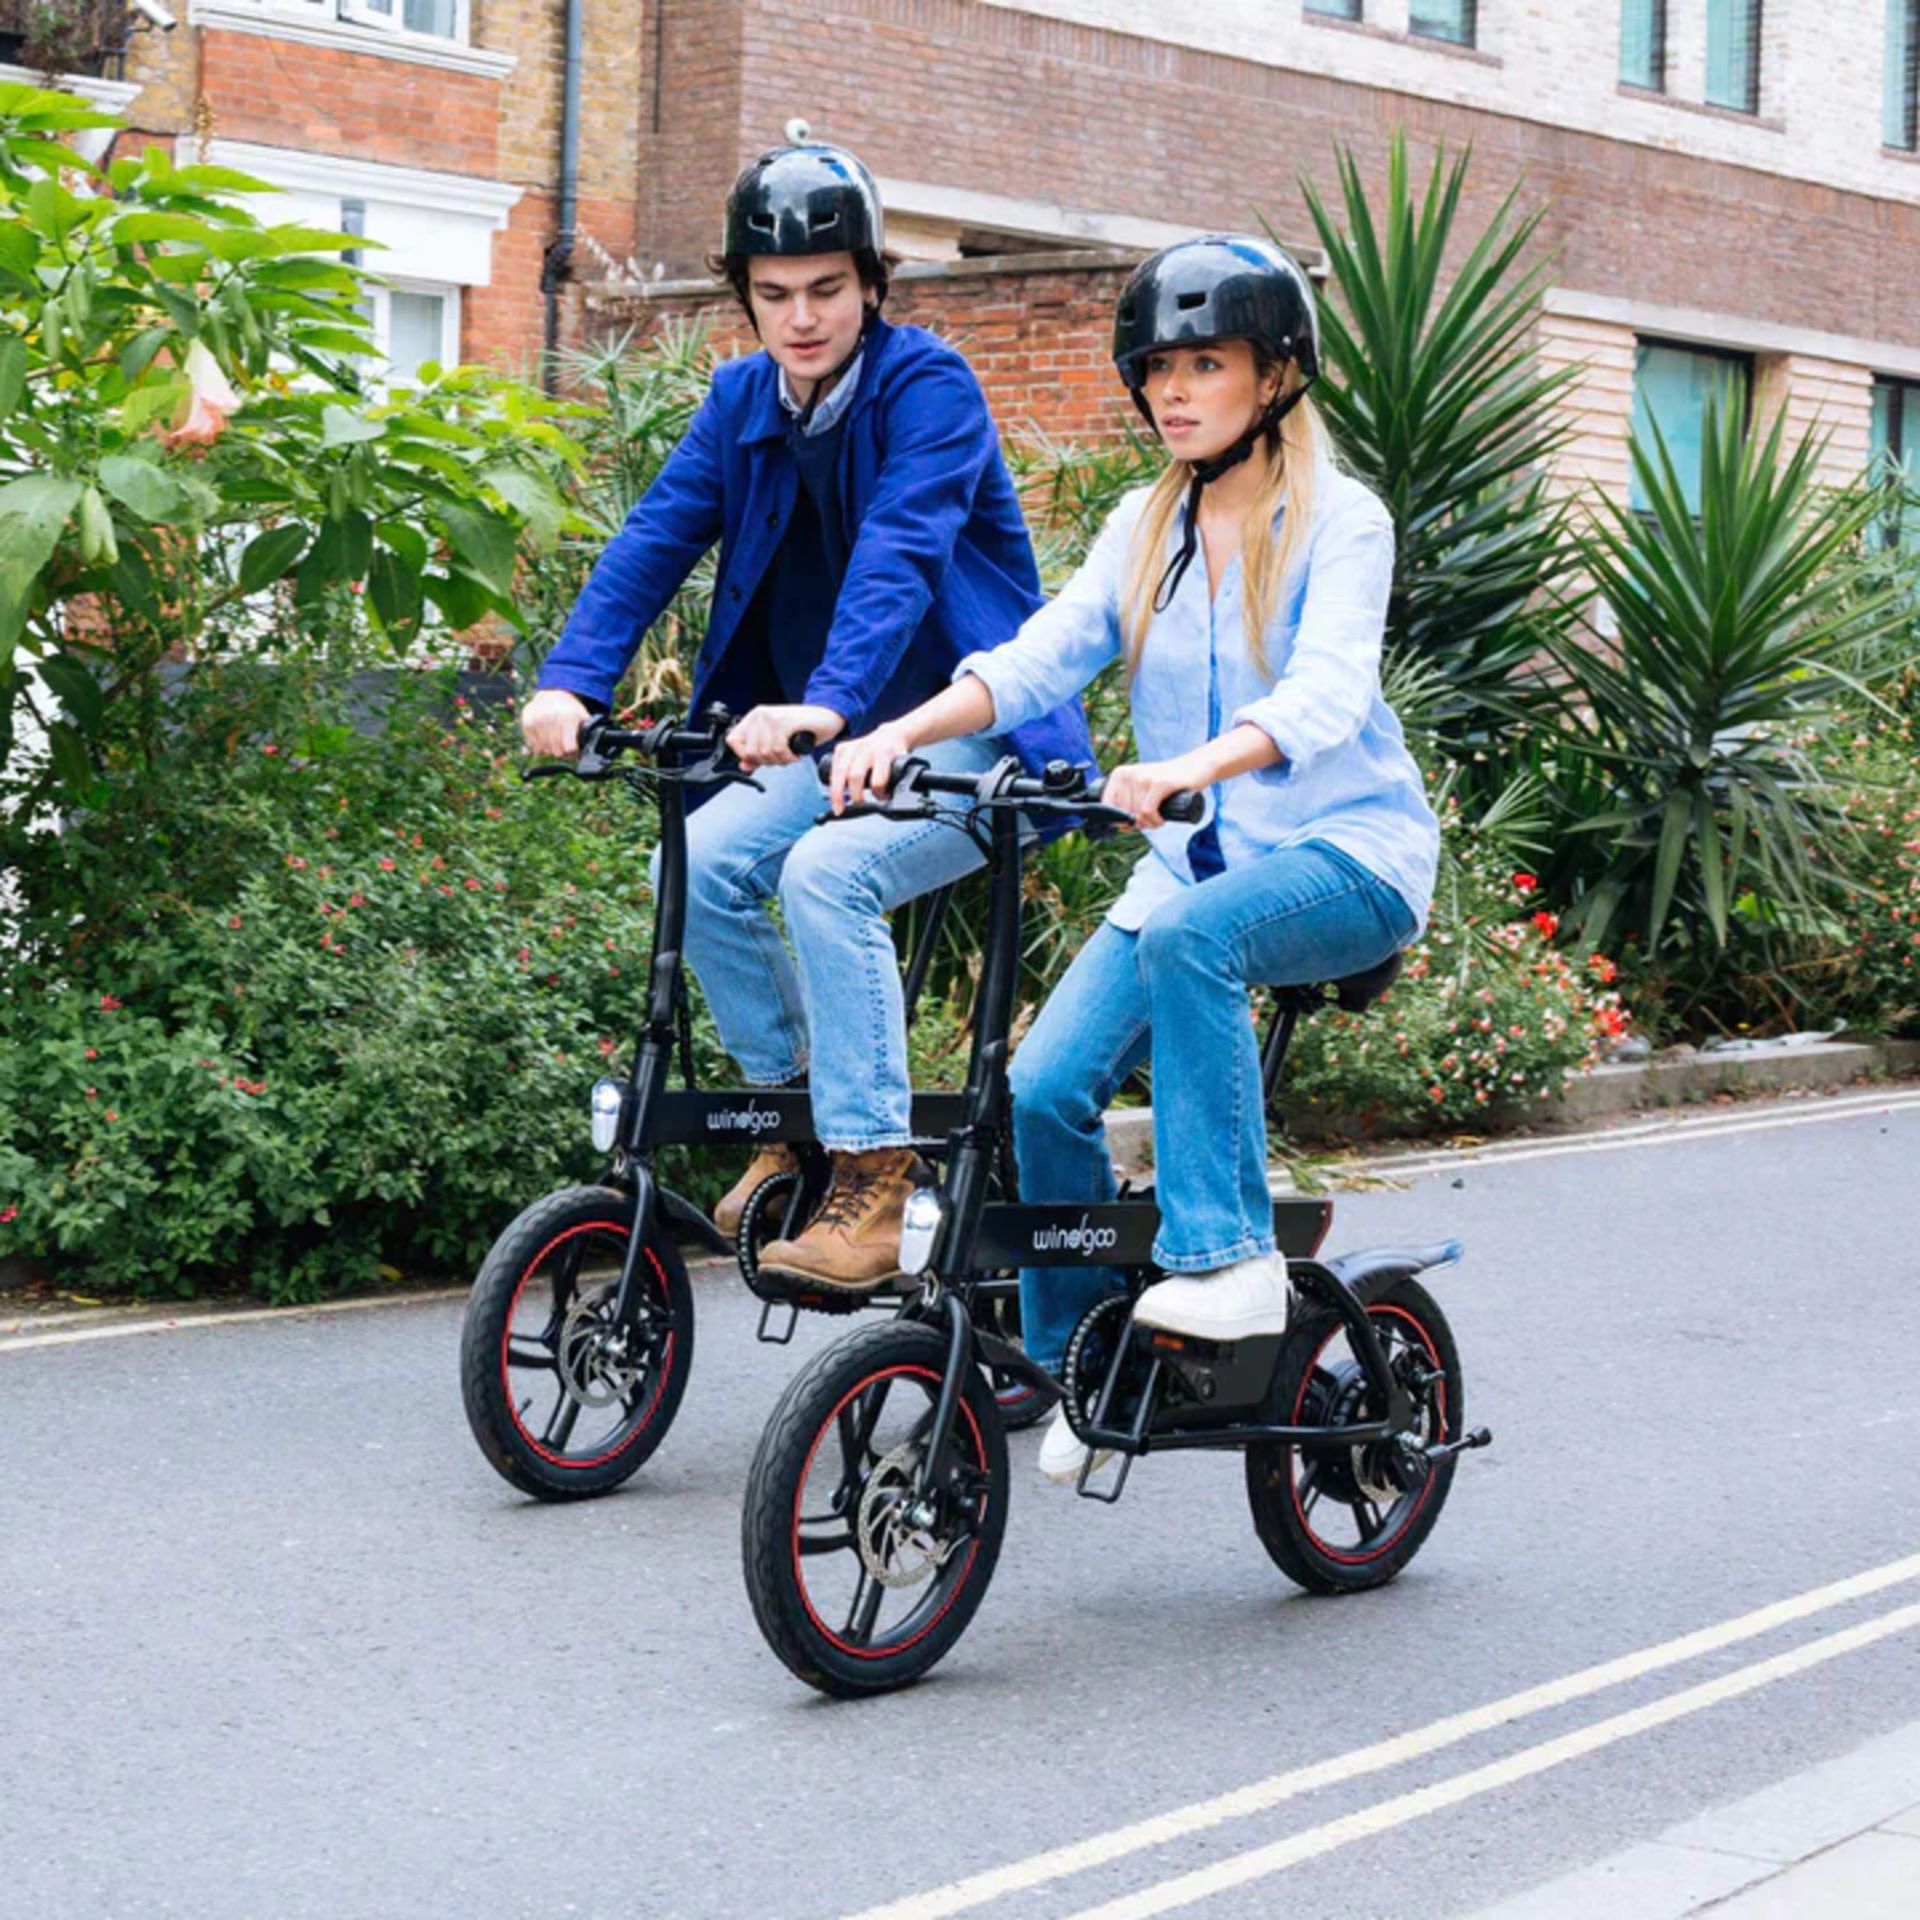 Windgoo B20 Pro Electric Bike. RRP £1,100.99. With 16-inch-wide tires and a frame of upgraded - Bild 5 aus 7